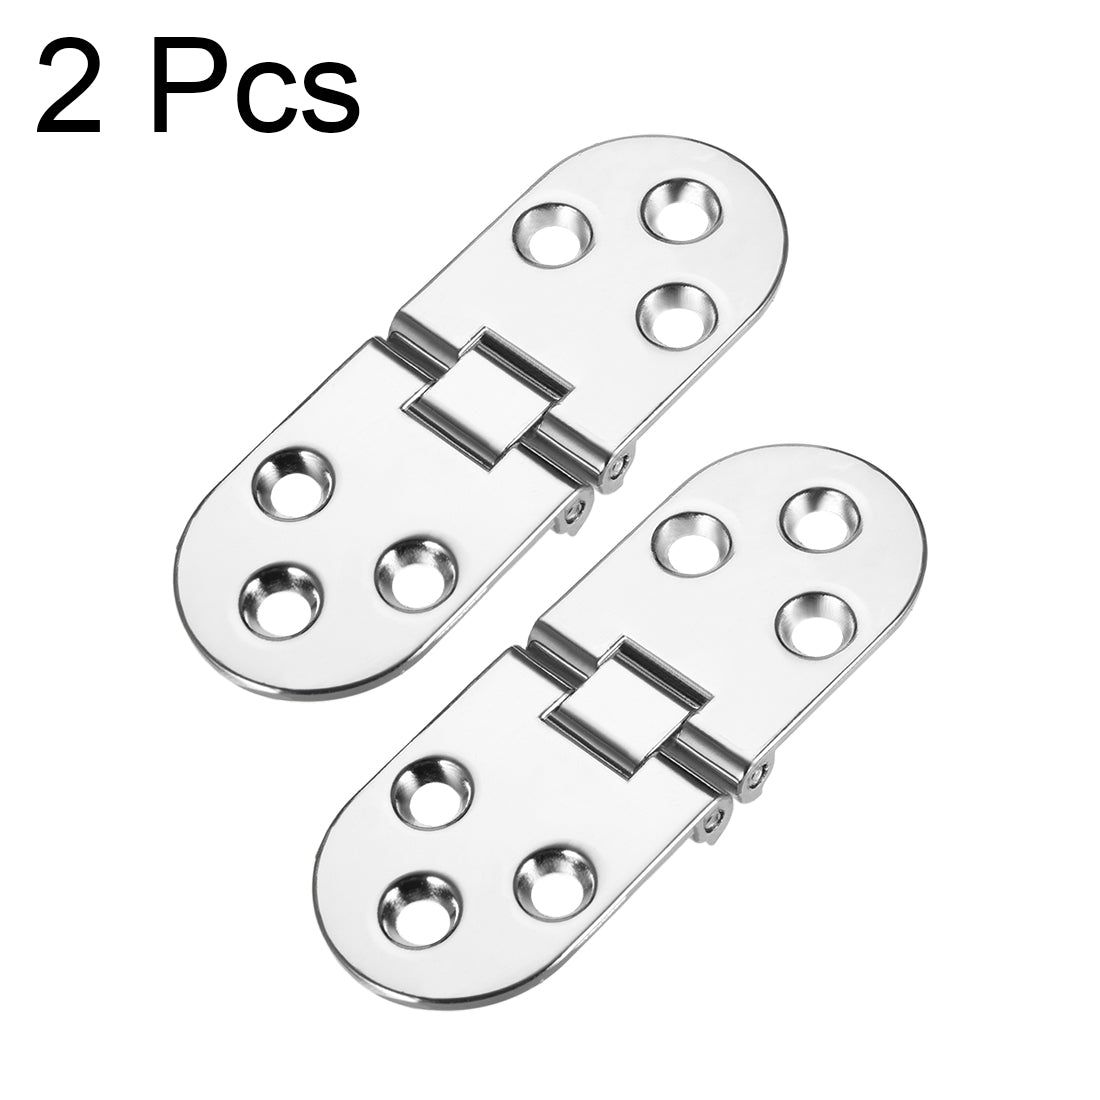 uxcell Uxcell 2 Pcs Sewing Aircraft Table Folding Flip Hinge, Zinc alloy Chrome Plating Finish